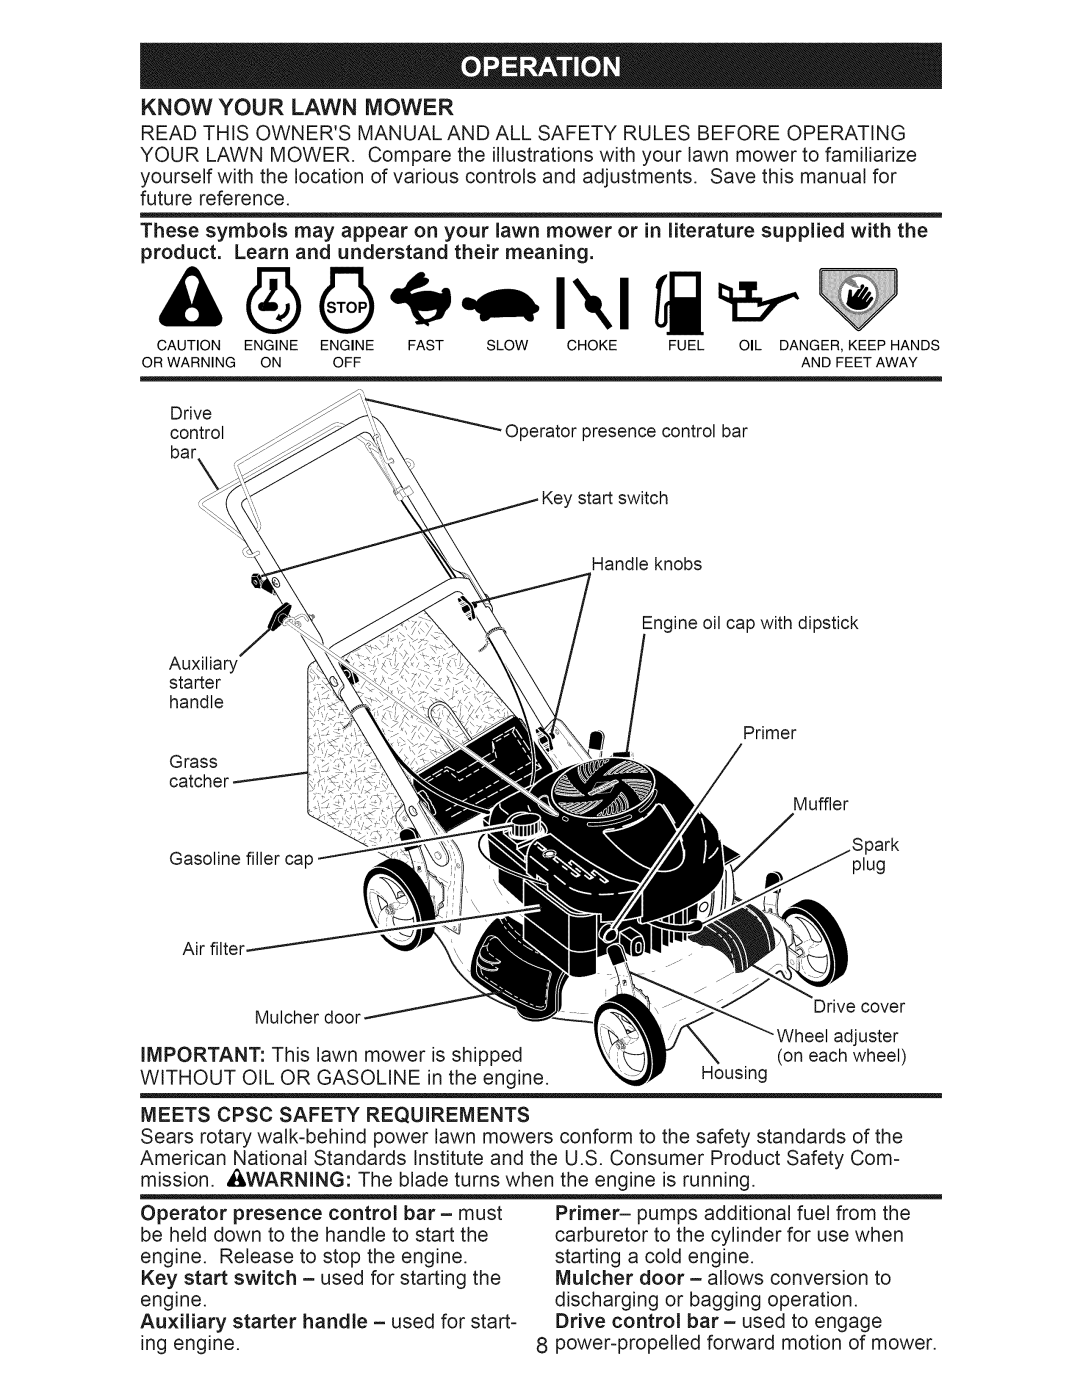 Craftsman 917.376241 owner manual Know Your Lawn Mower, Without OIL or Gasoline, Meets Cpsc Safety Requirements 